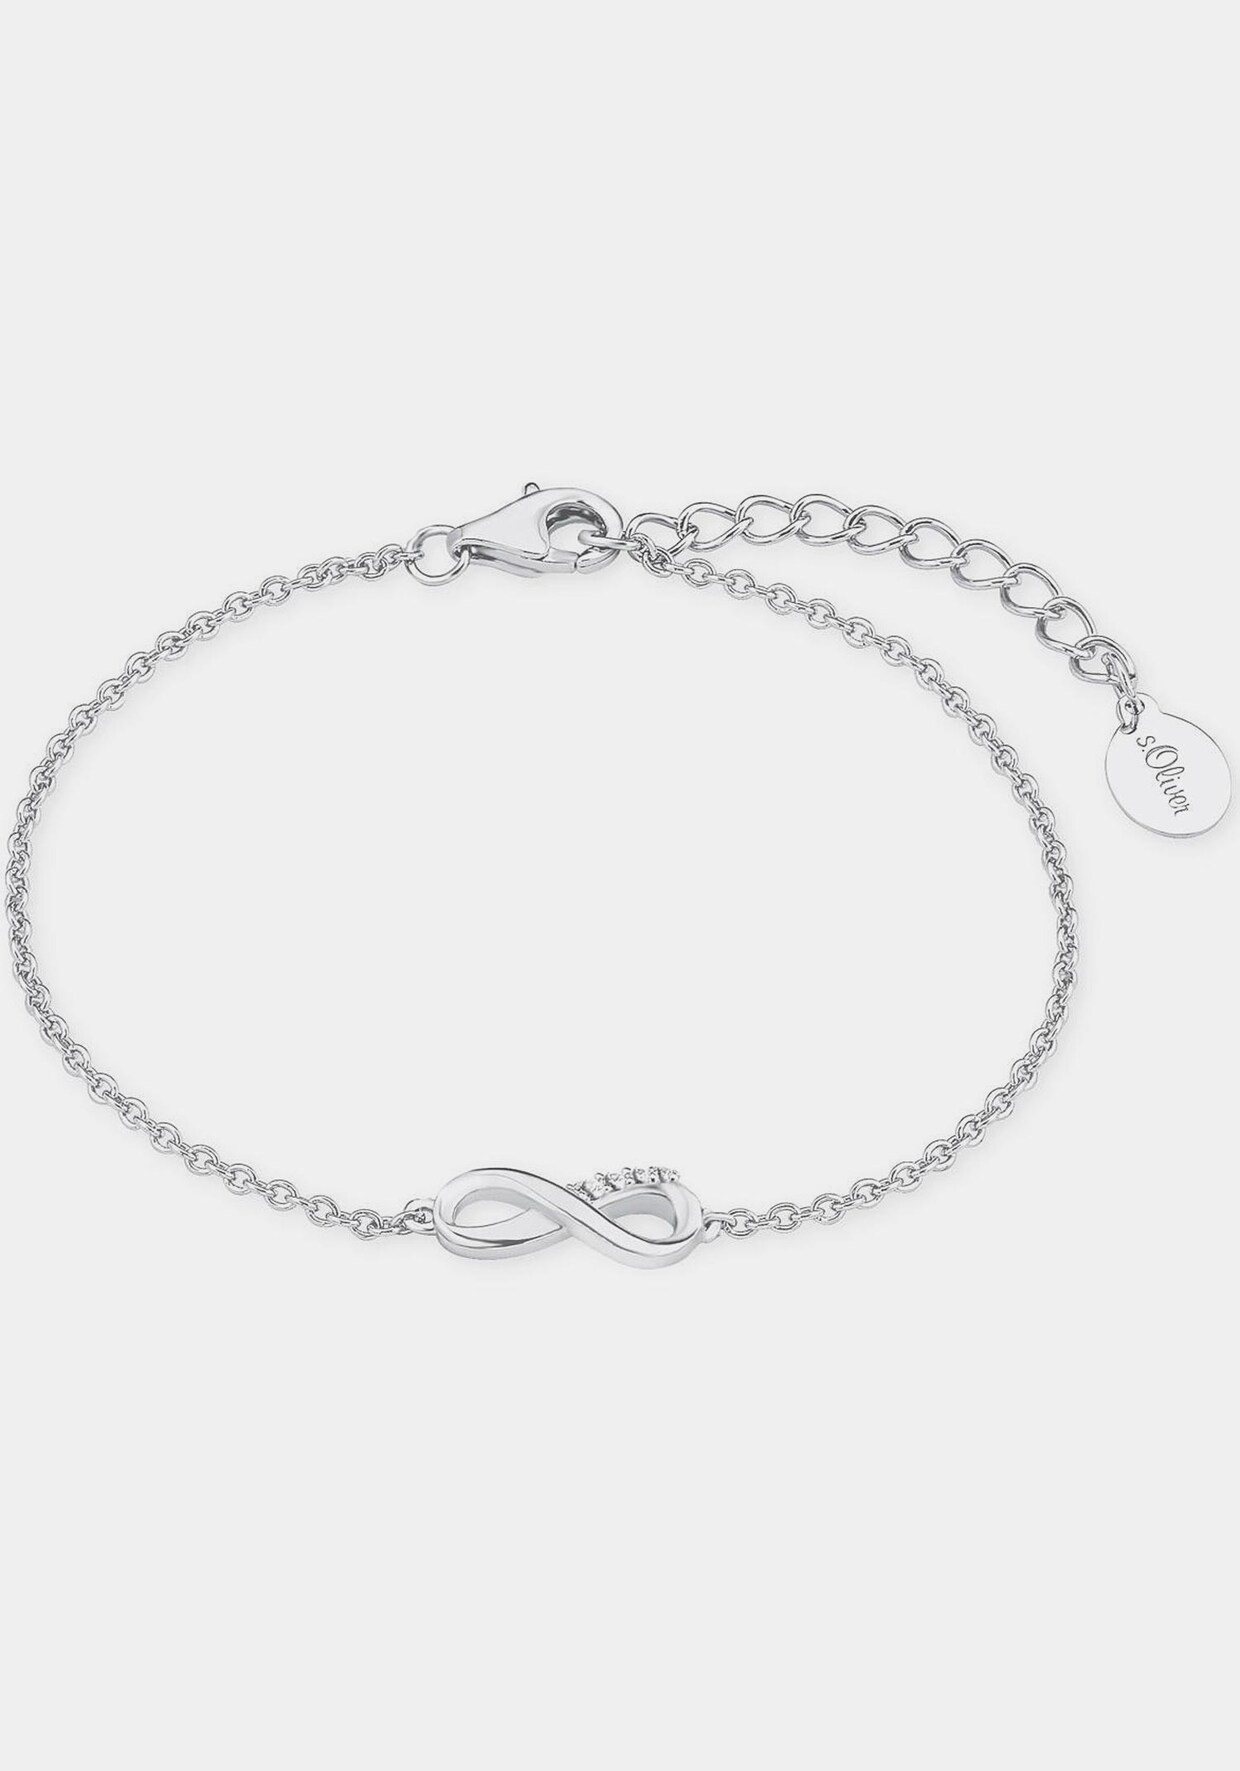 s.Oliver Silberarmband - silber 925